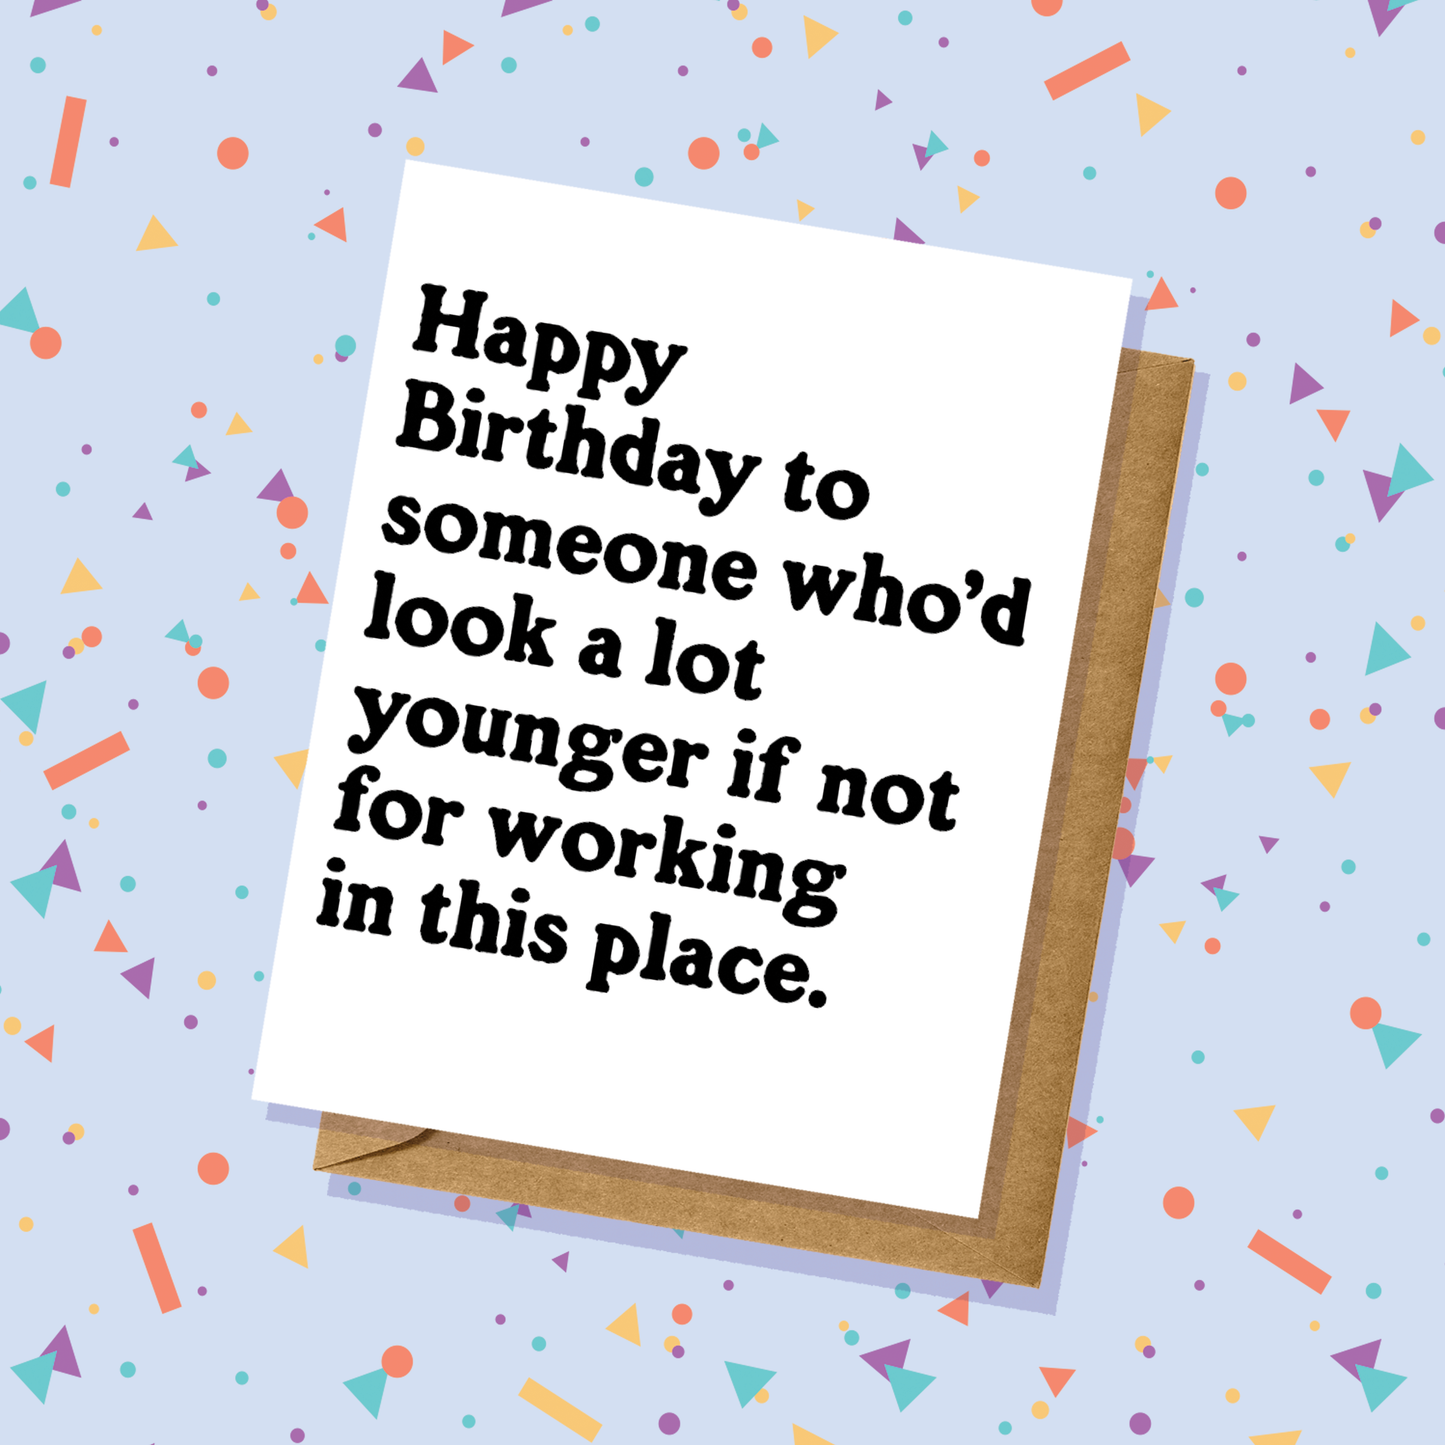 Lucky Mfg. Co. - "Look Younger if You Didn't Work Here" Birthday Card - Totally Inappropriate